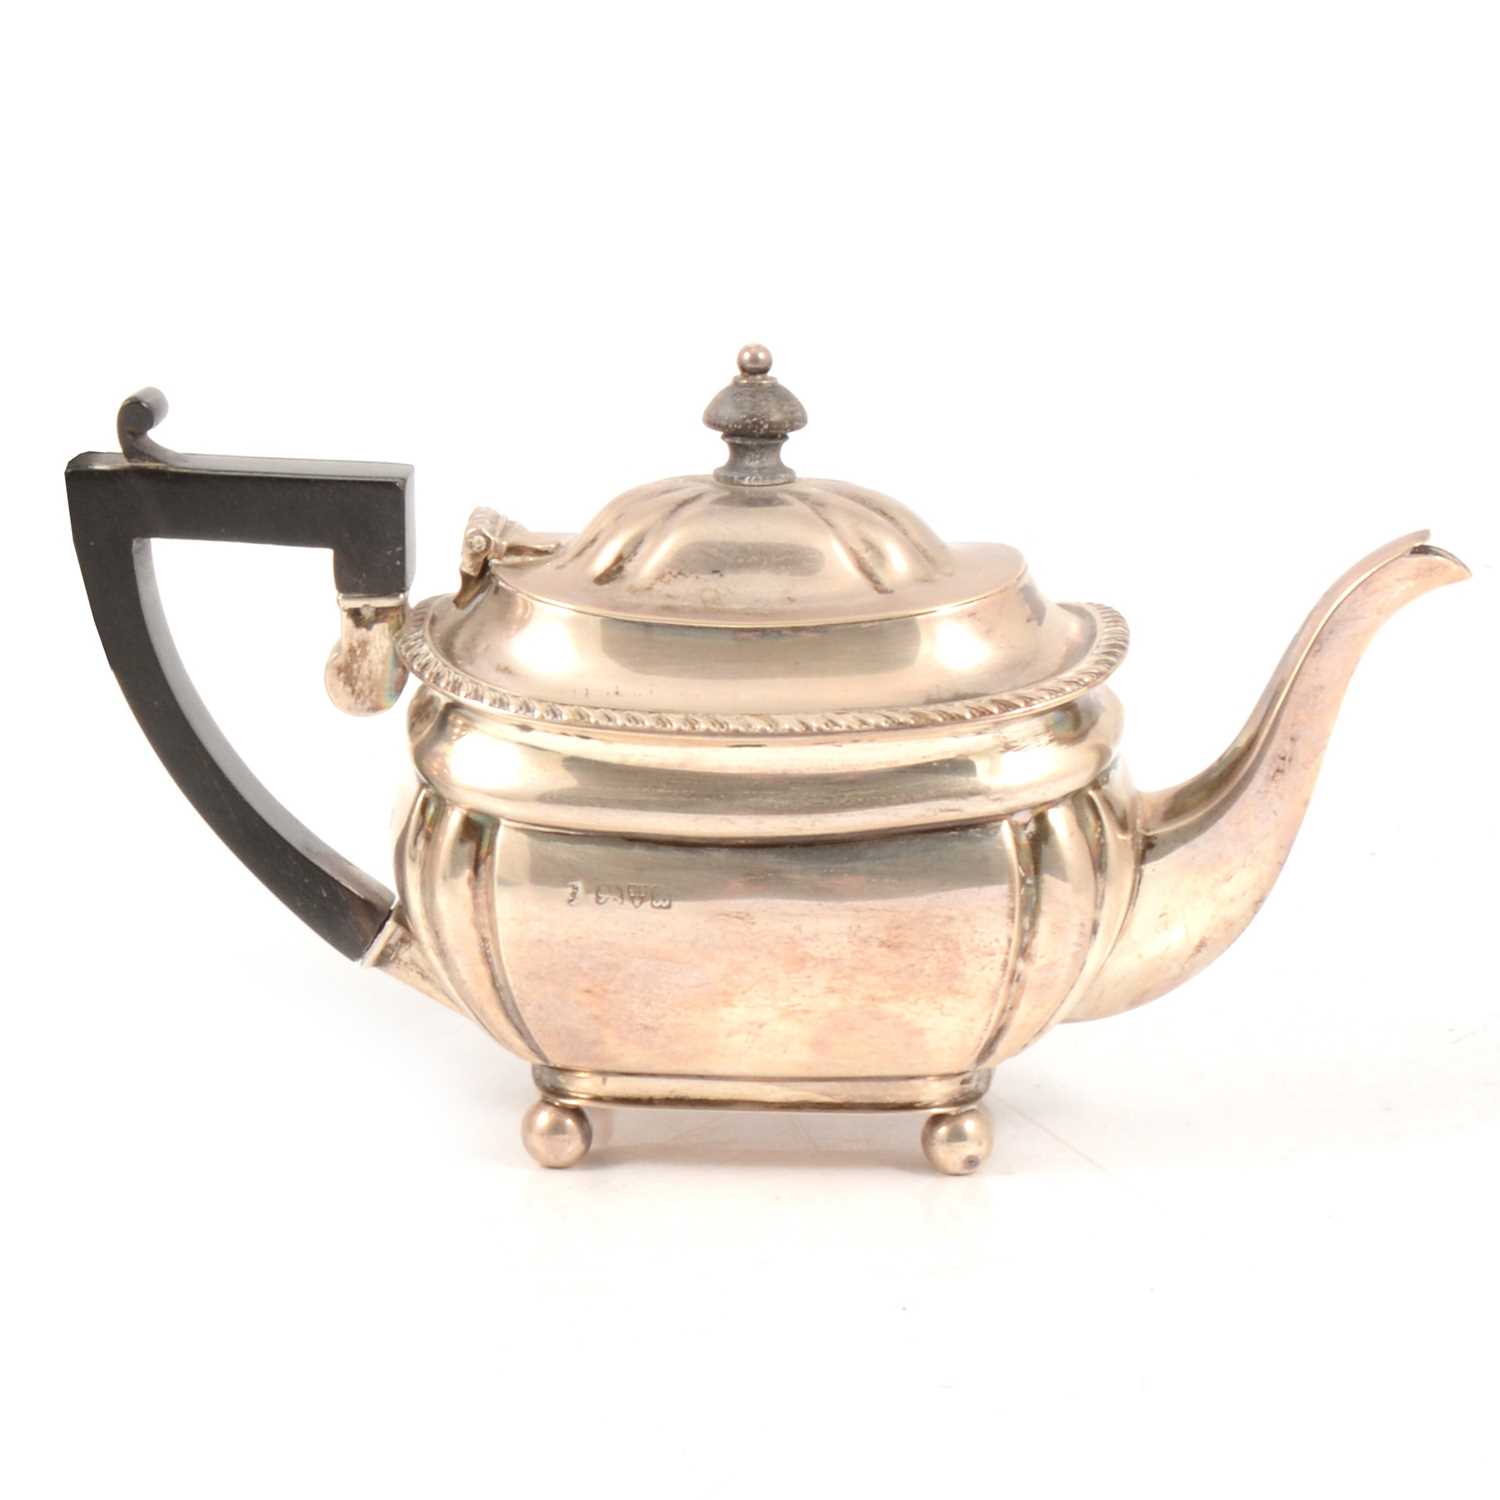 Lot 243 - Edwardian silver bachelor’s teapot, Haseler Brothers, Chester 1902.